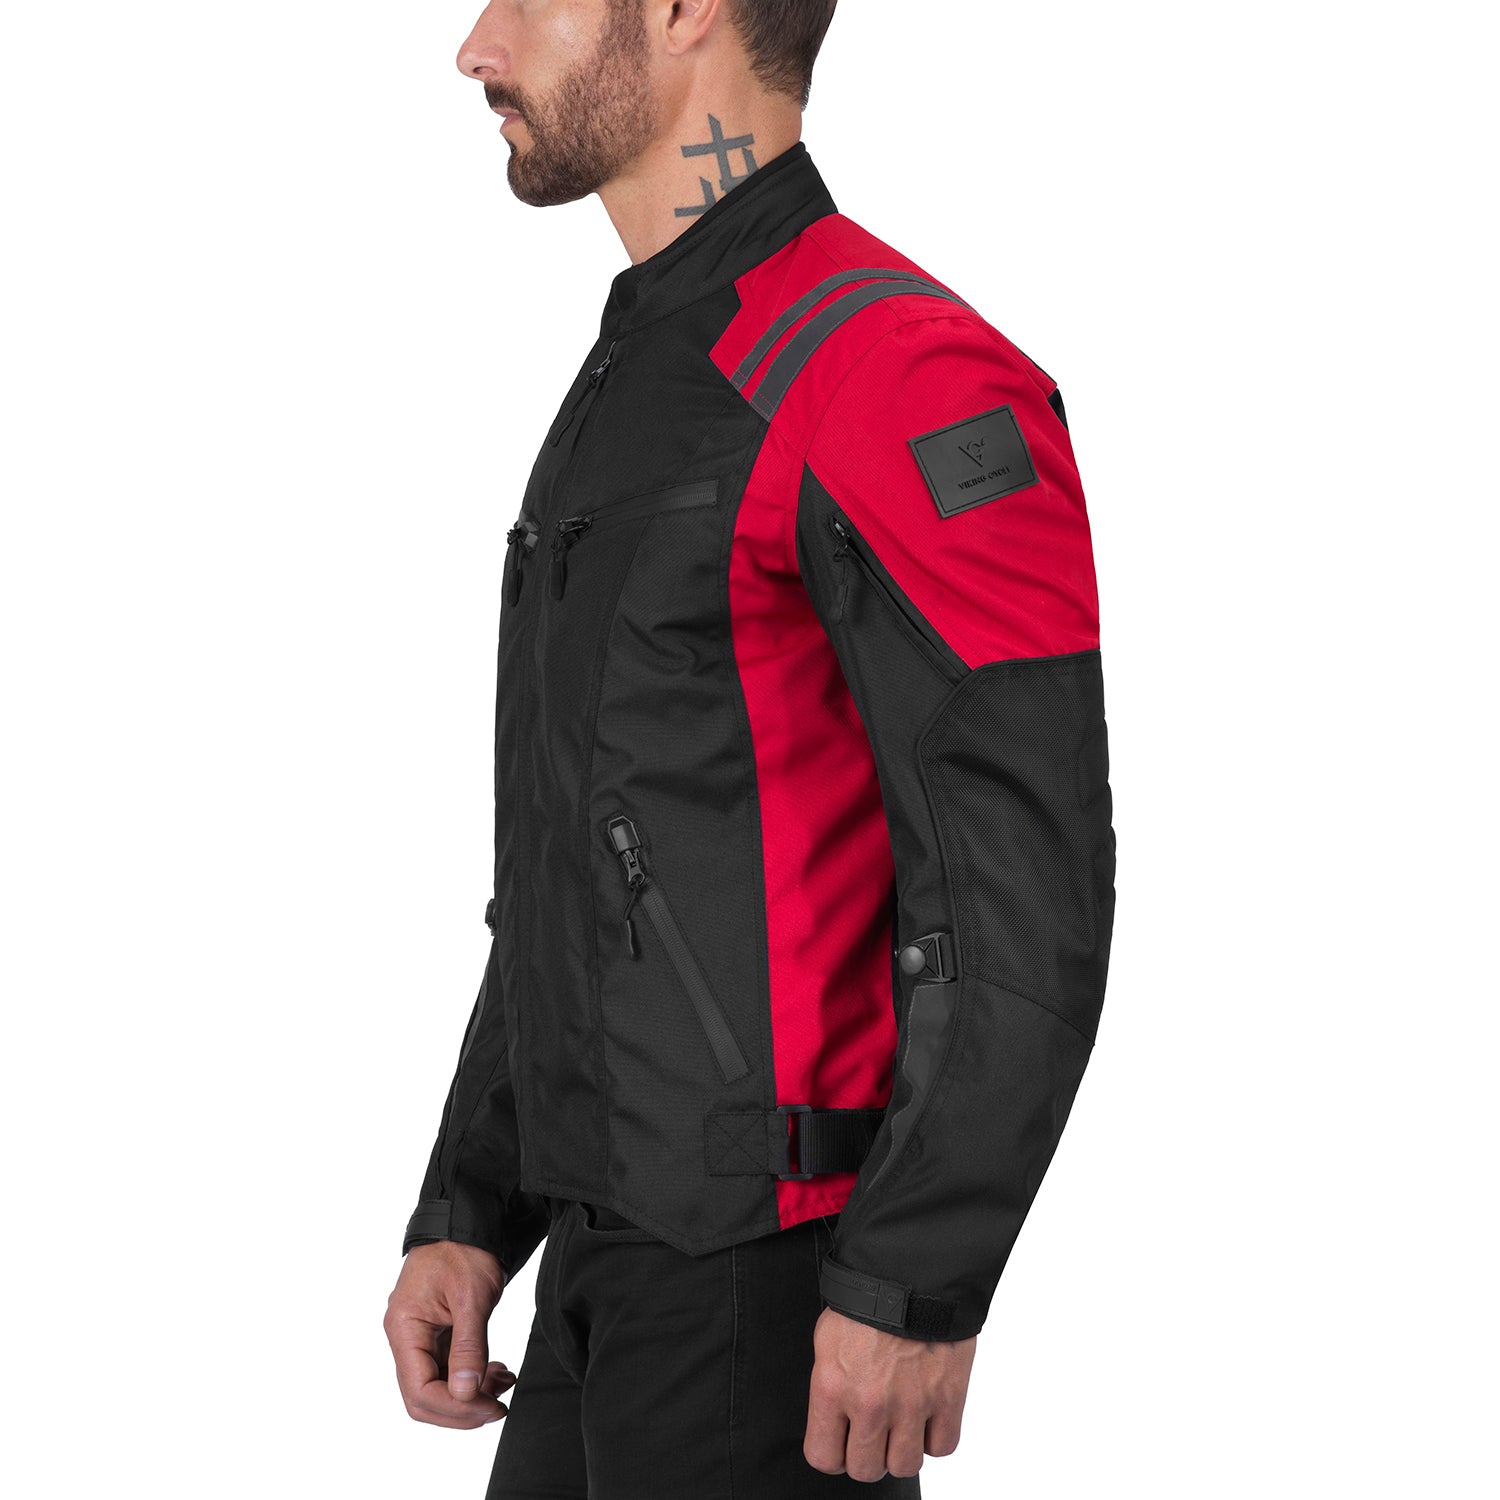 Quality Cycle Find – Ironborn Viking Red Jacket Biker â€“ Vikingcycle Textile